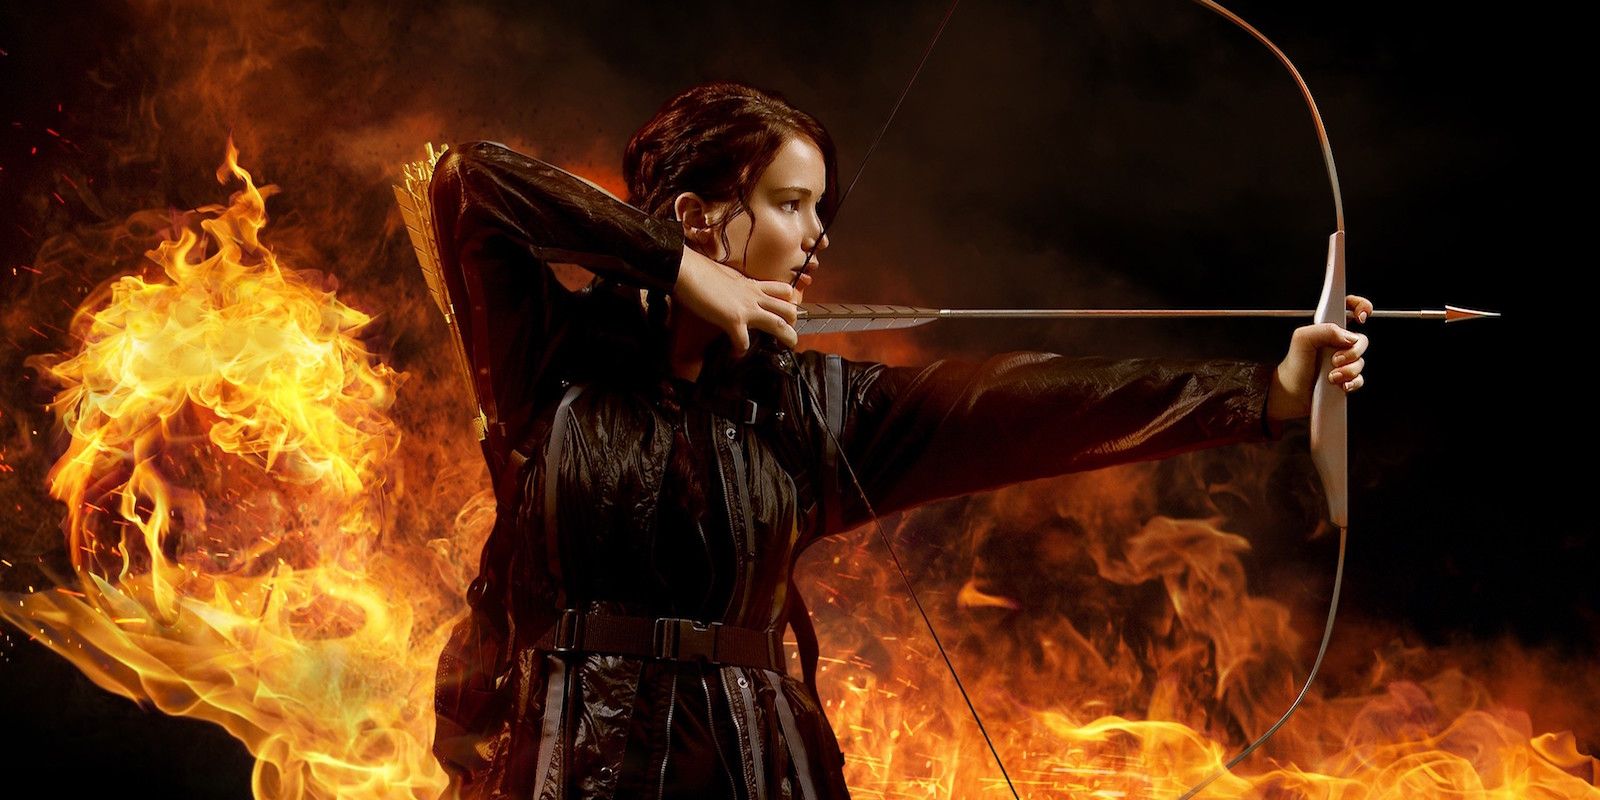 Katniss shooting an arrow with flames in the background from The Hunger Games